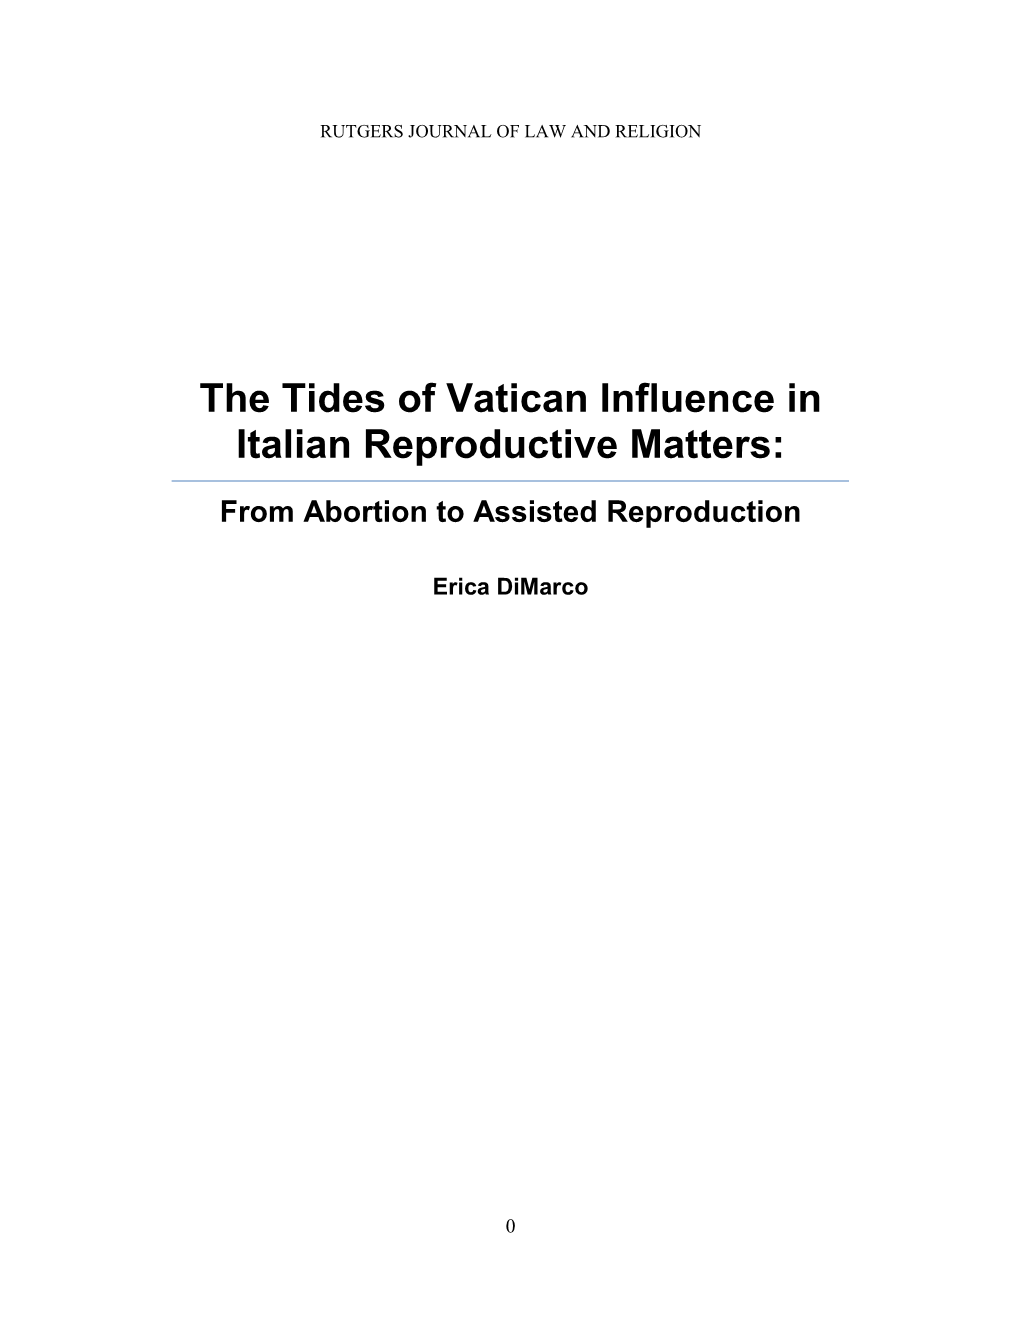 The Tides of Vatican Influence in Italian Reproductive Matters